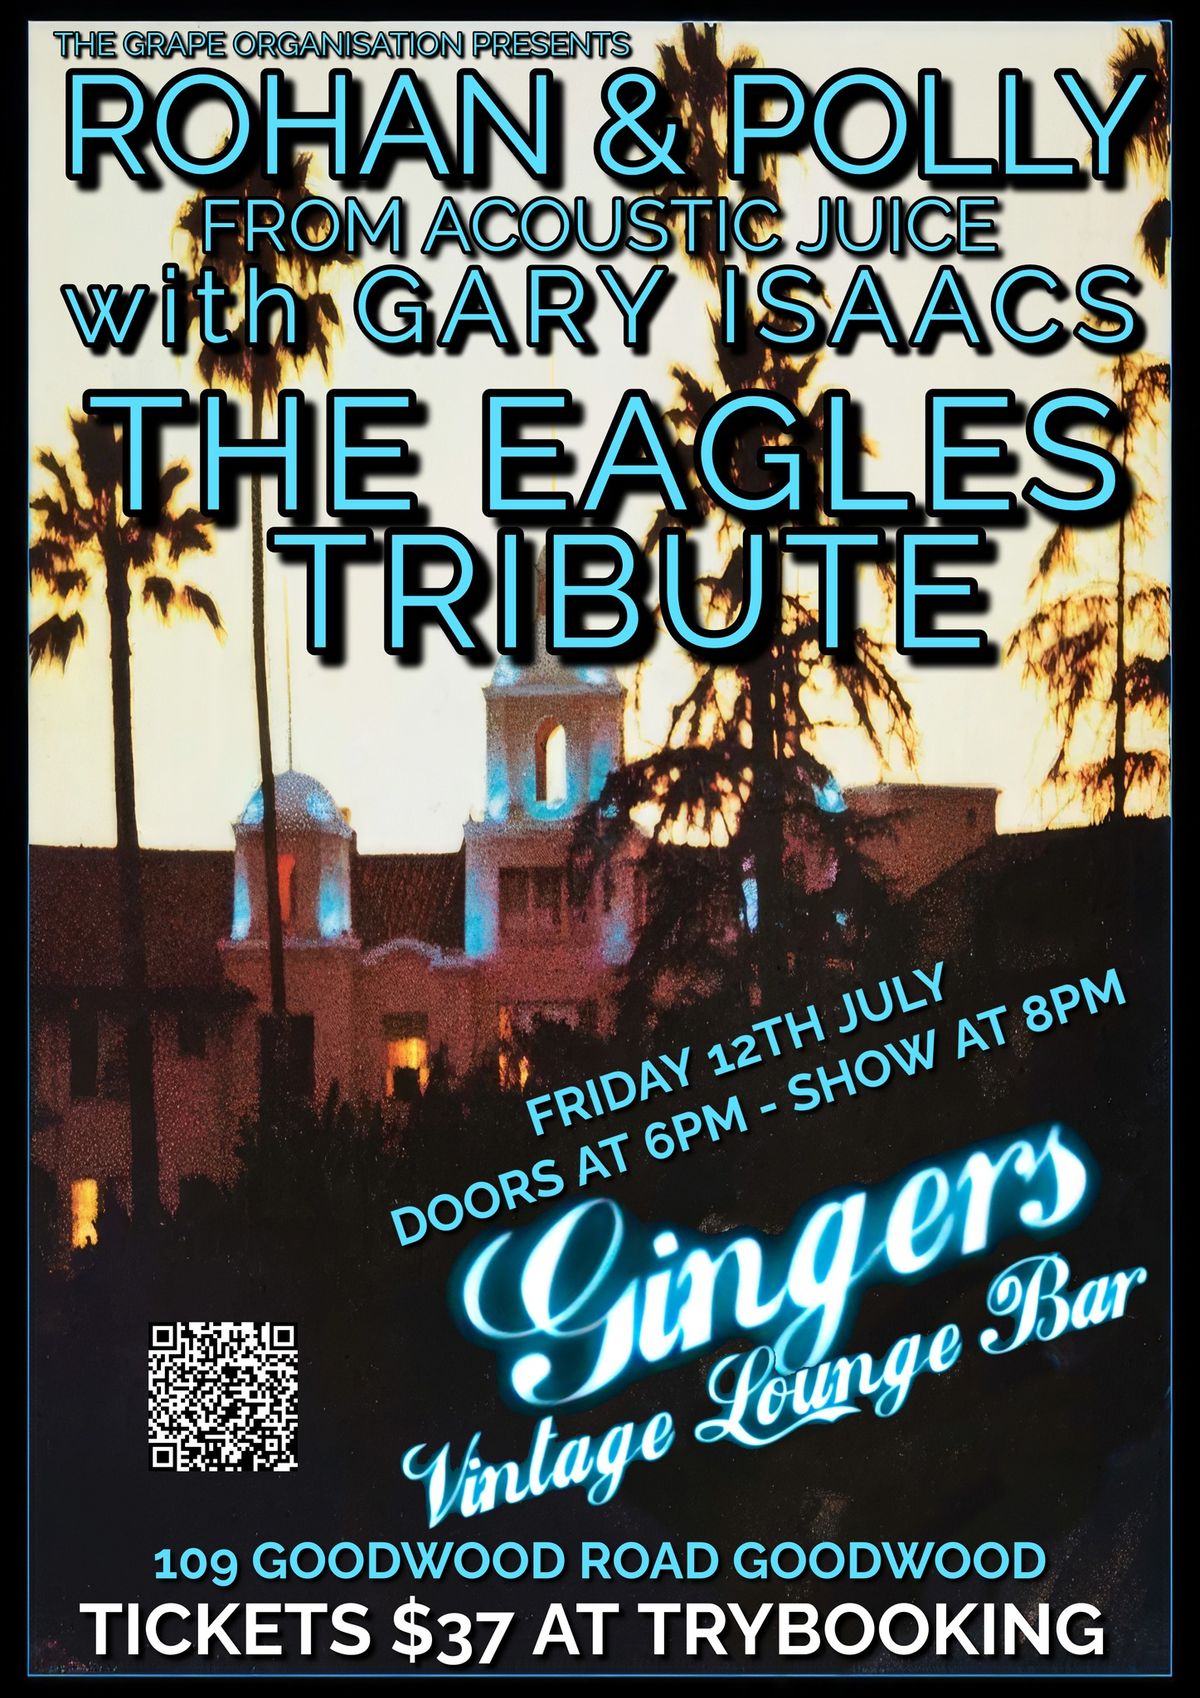 The Eagles Tribute - Rohan & Polly with Gary Isaacs